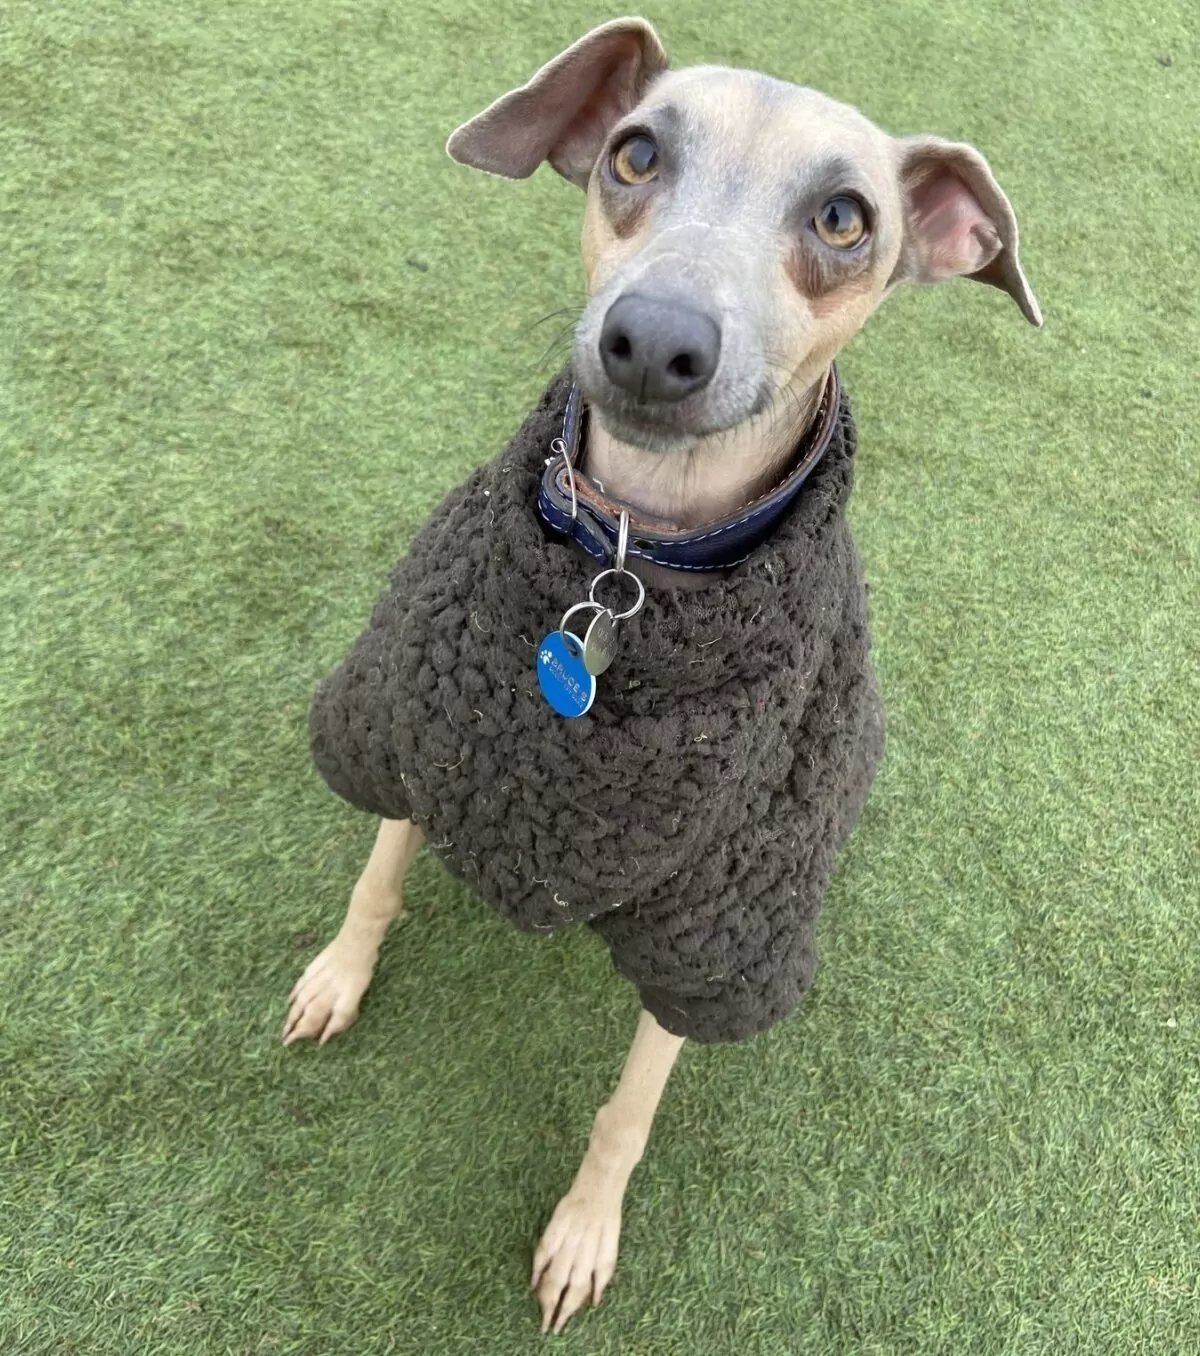 Italian greyhound wearing their winter coat at doggy day care